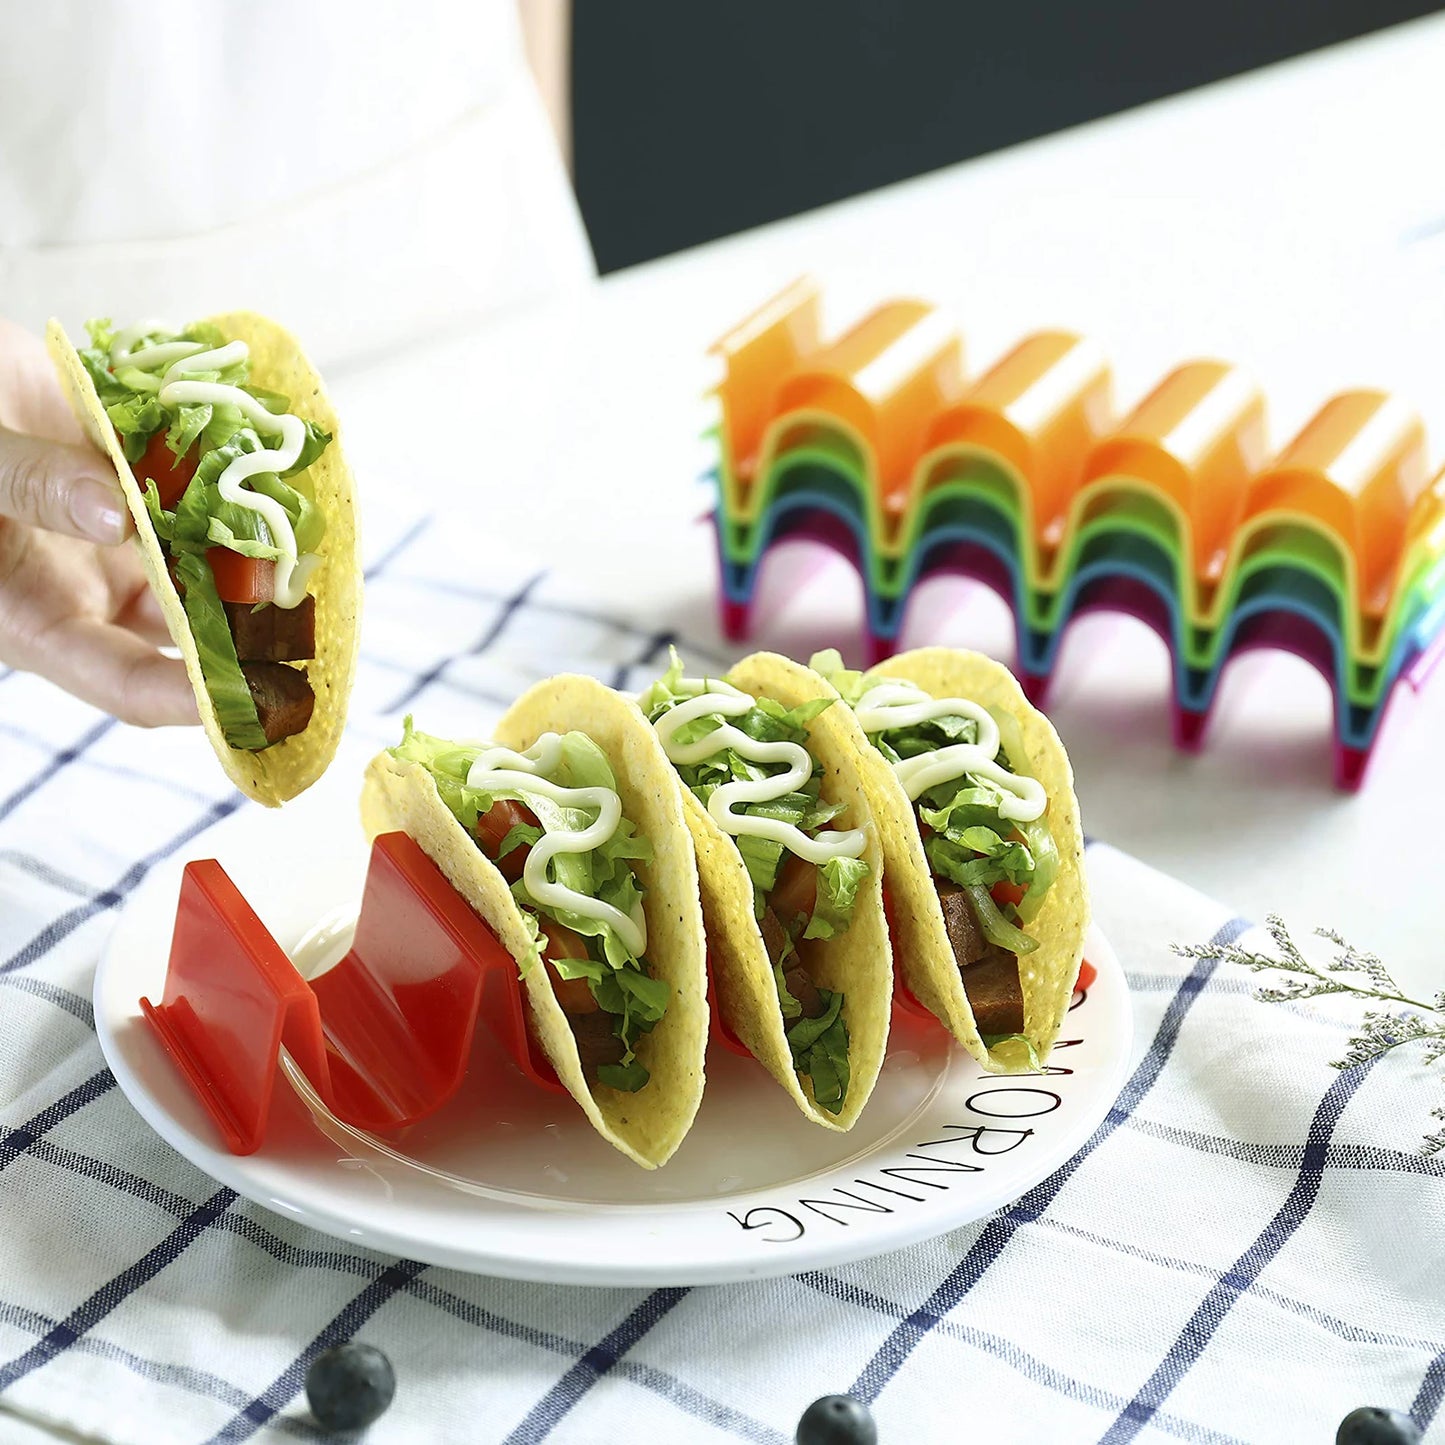 Mexican Roll Rack Taco Holder - Creative Wave-Shaped Tortilla Pancake Stand, Kitchen Gadget Tray for Tacos and Cakes